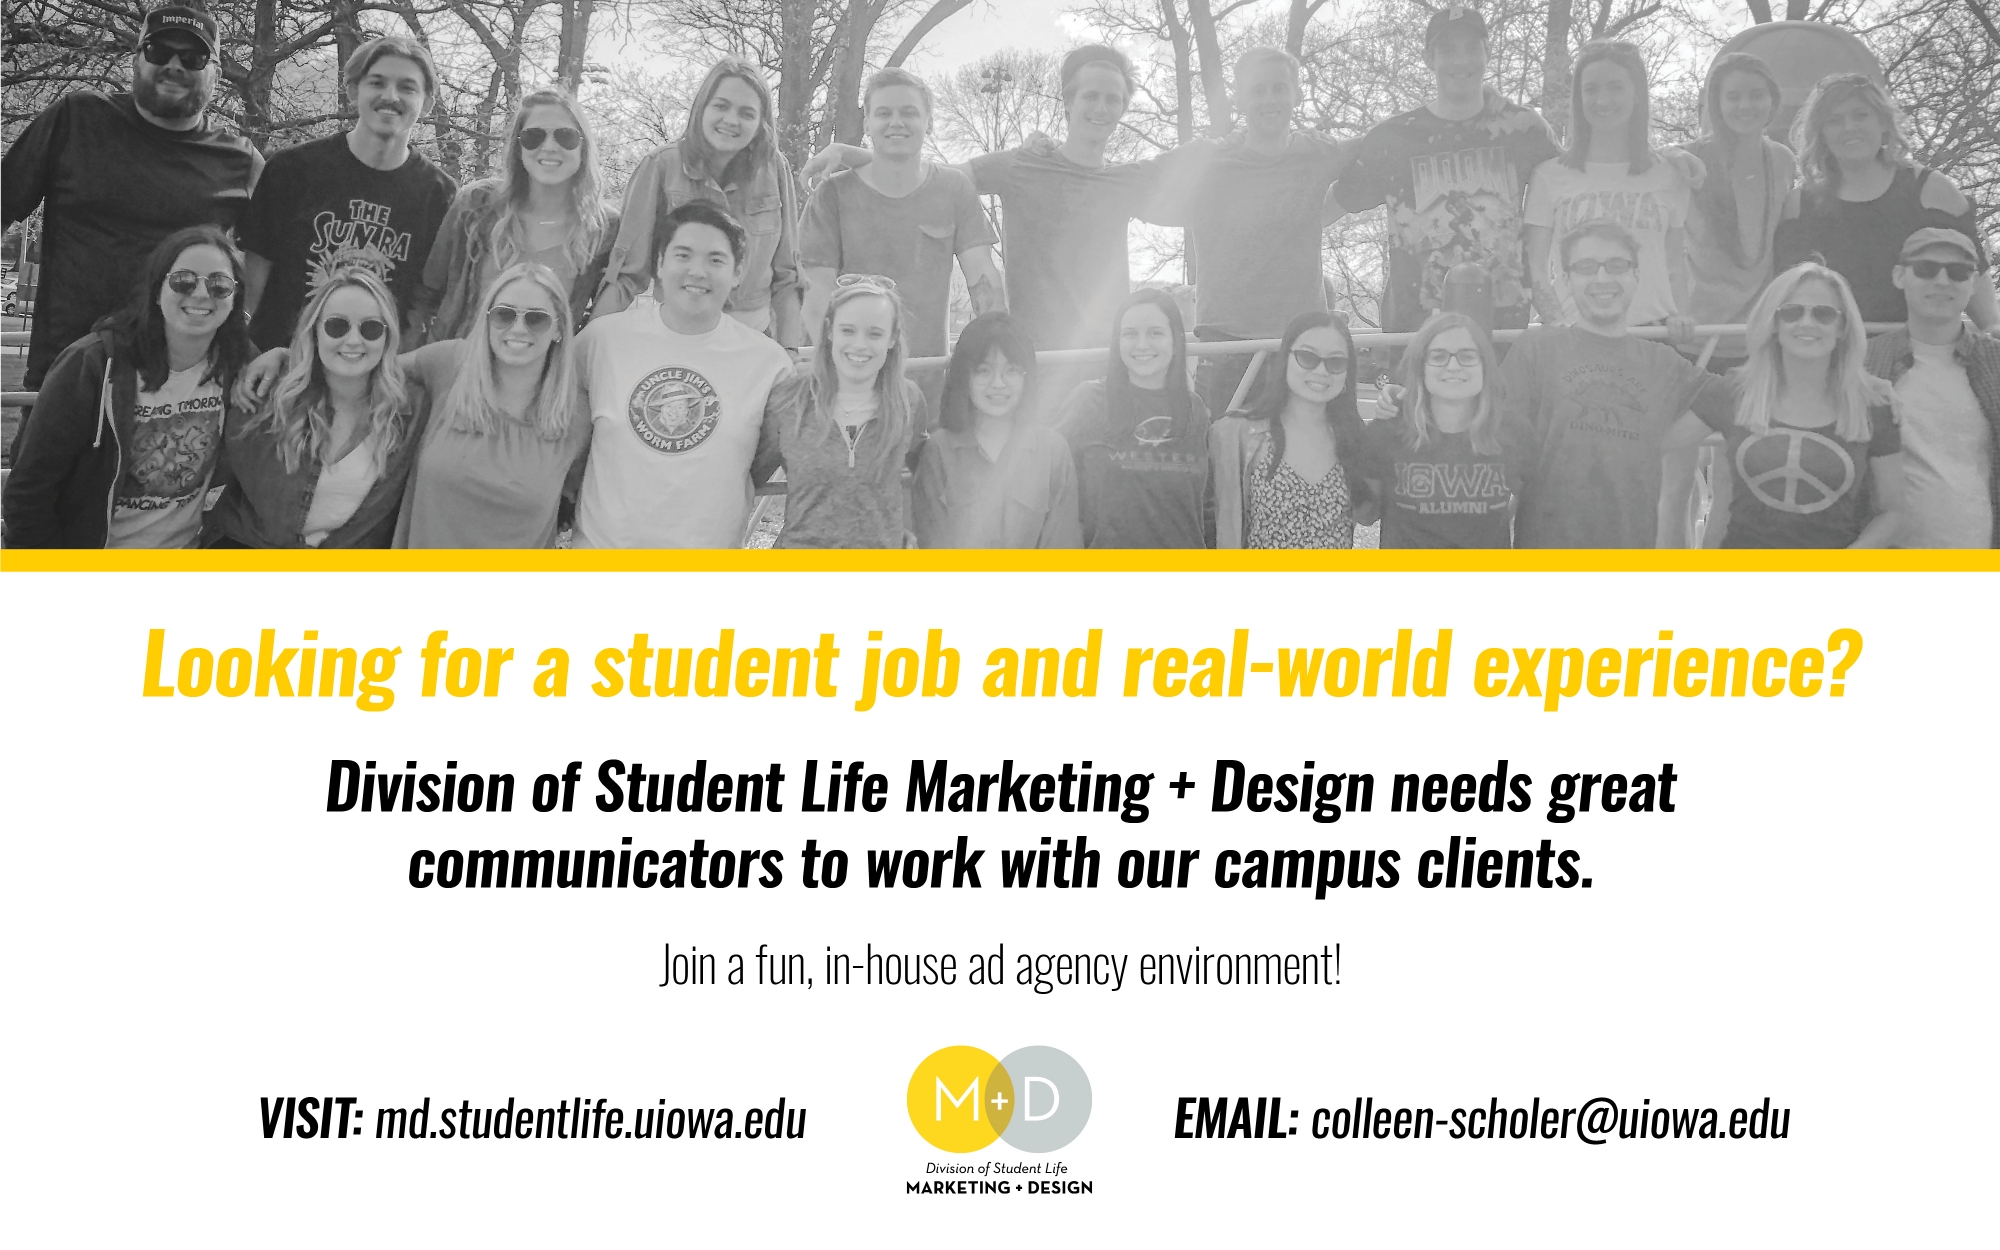 Looking for a student job and real-world experience? Division of Student Life Marketing + Design needs great communicators to work with our campus clients. Join a fun, in-house ad agency encironment! VISIT: md.studentlife.uiowa.edu EMAIL: colleen-scholer@uiowa.edu